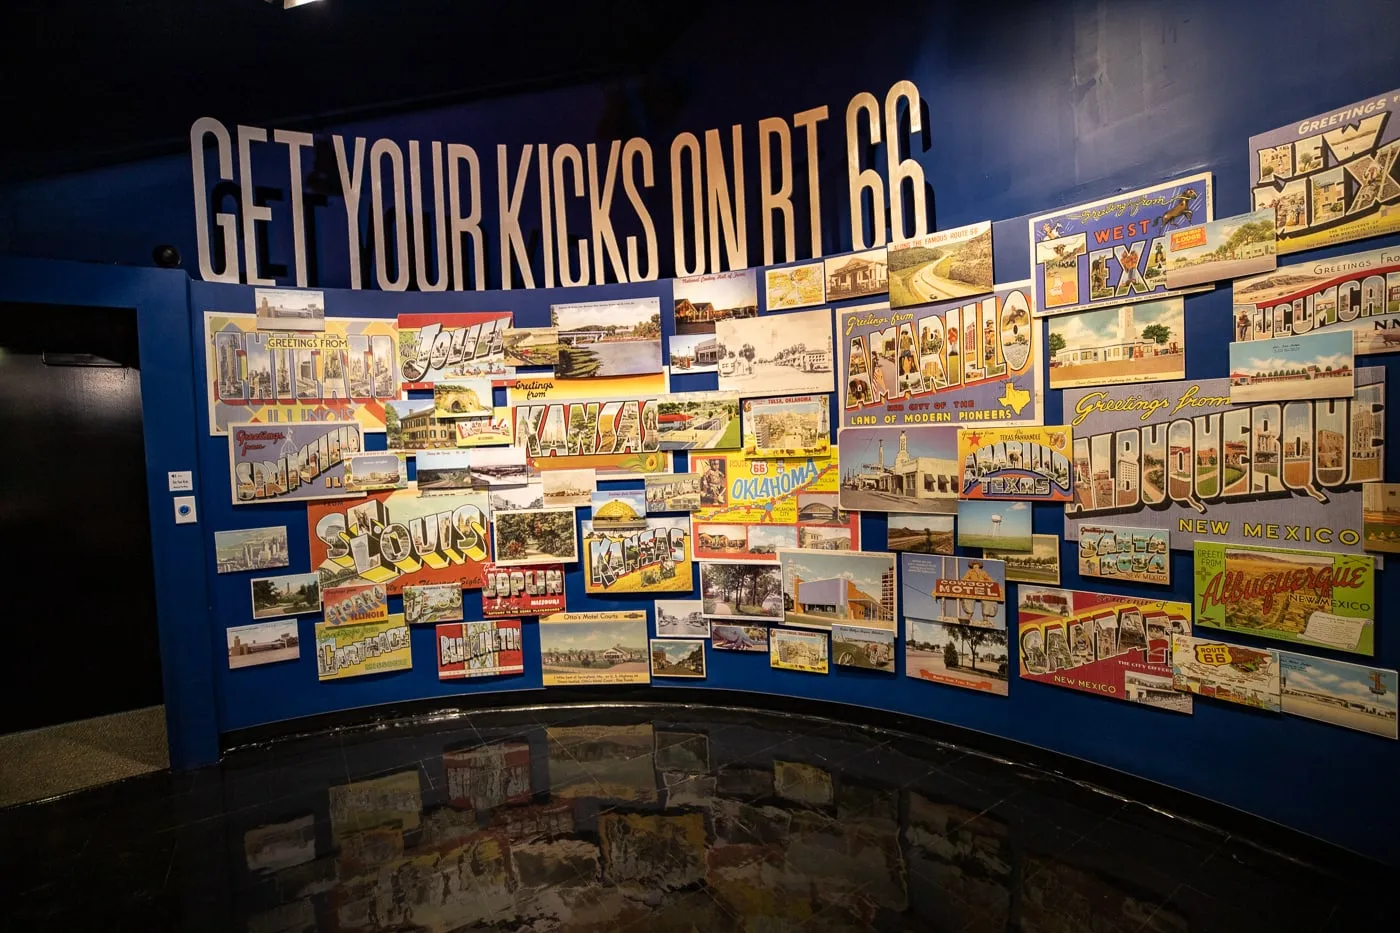 Get your kicks on Route 66 display at the Oklahoma Route 66 Museum in Clinton, Oklahoma